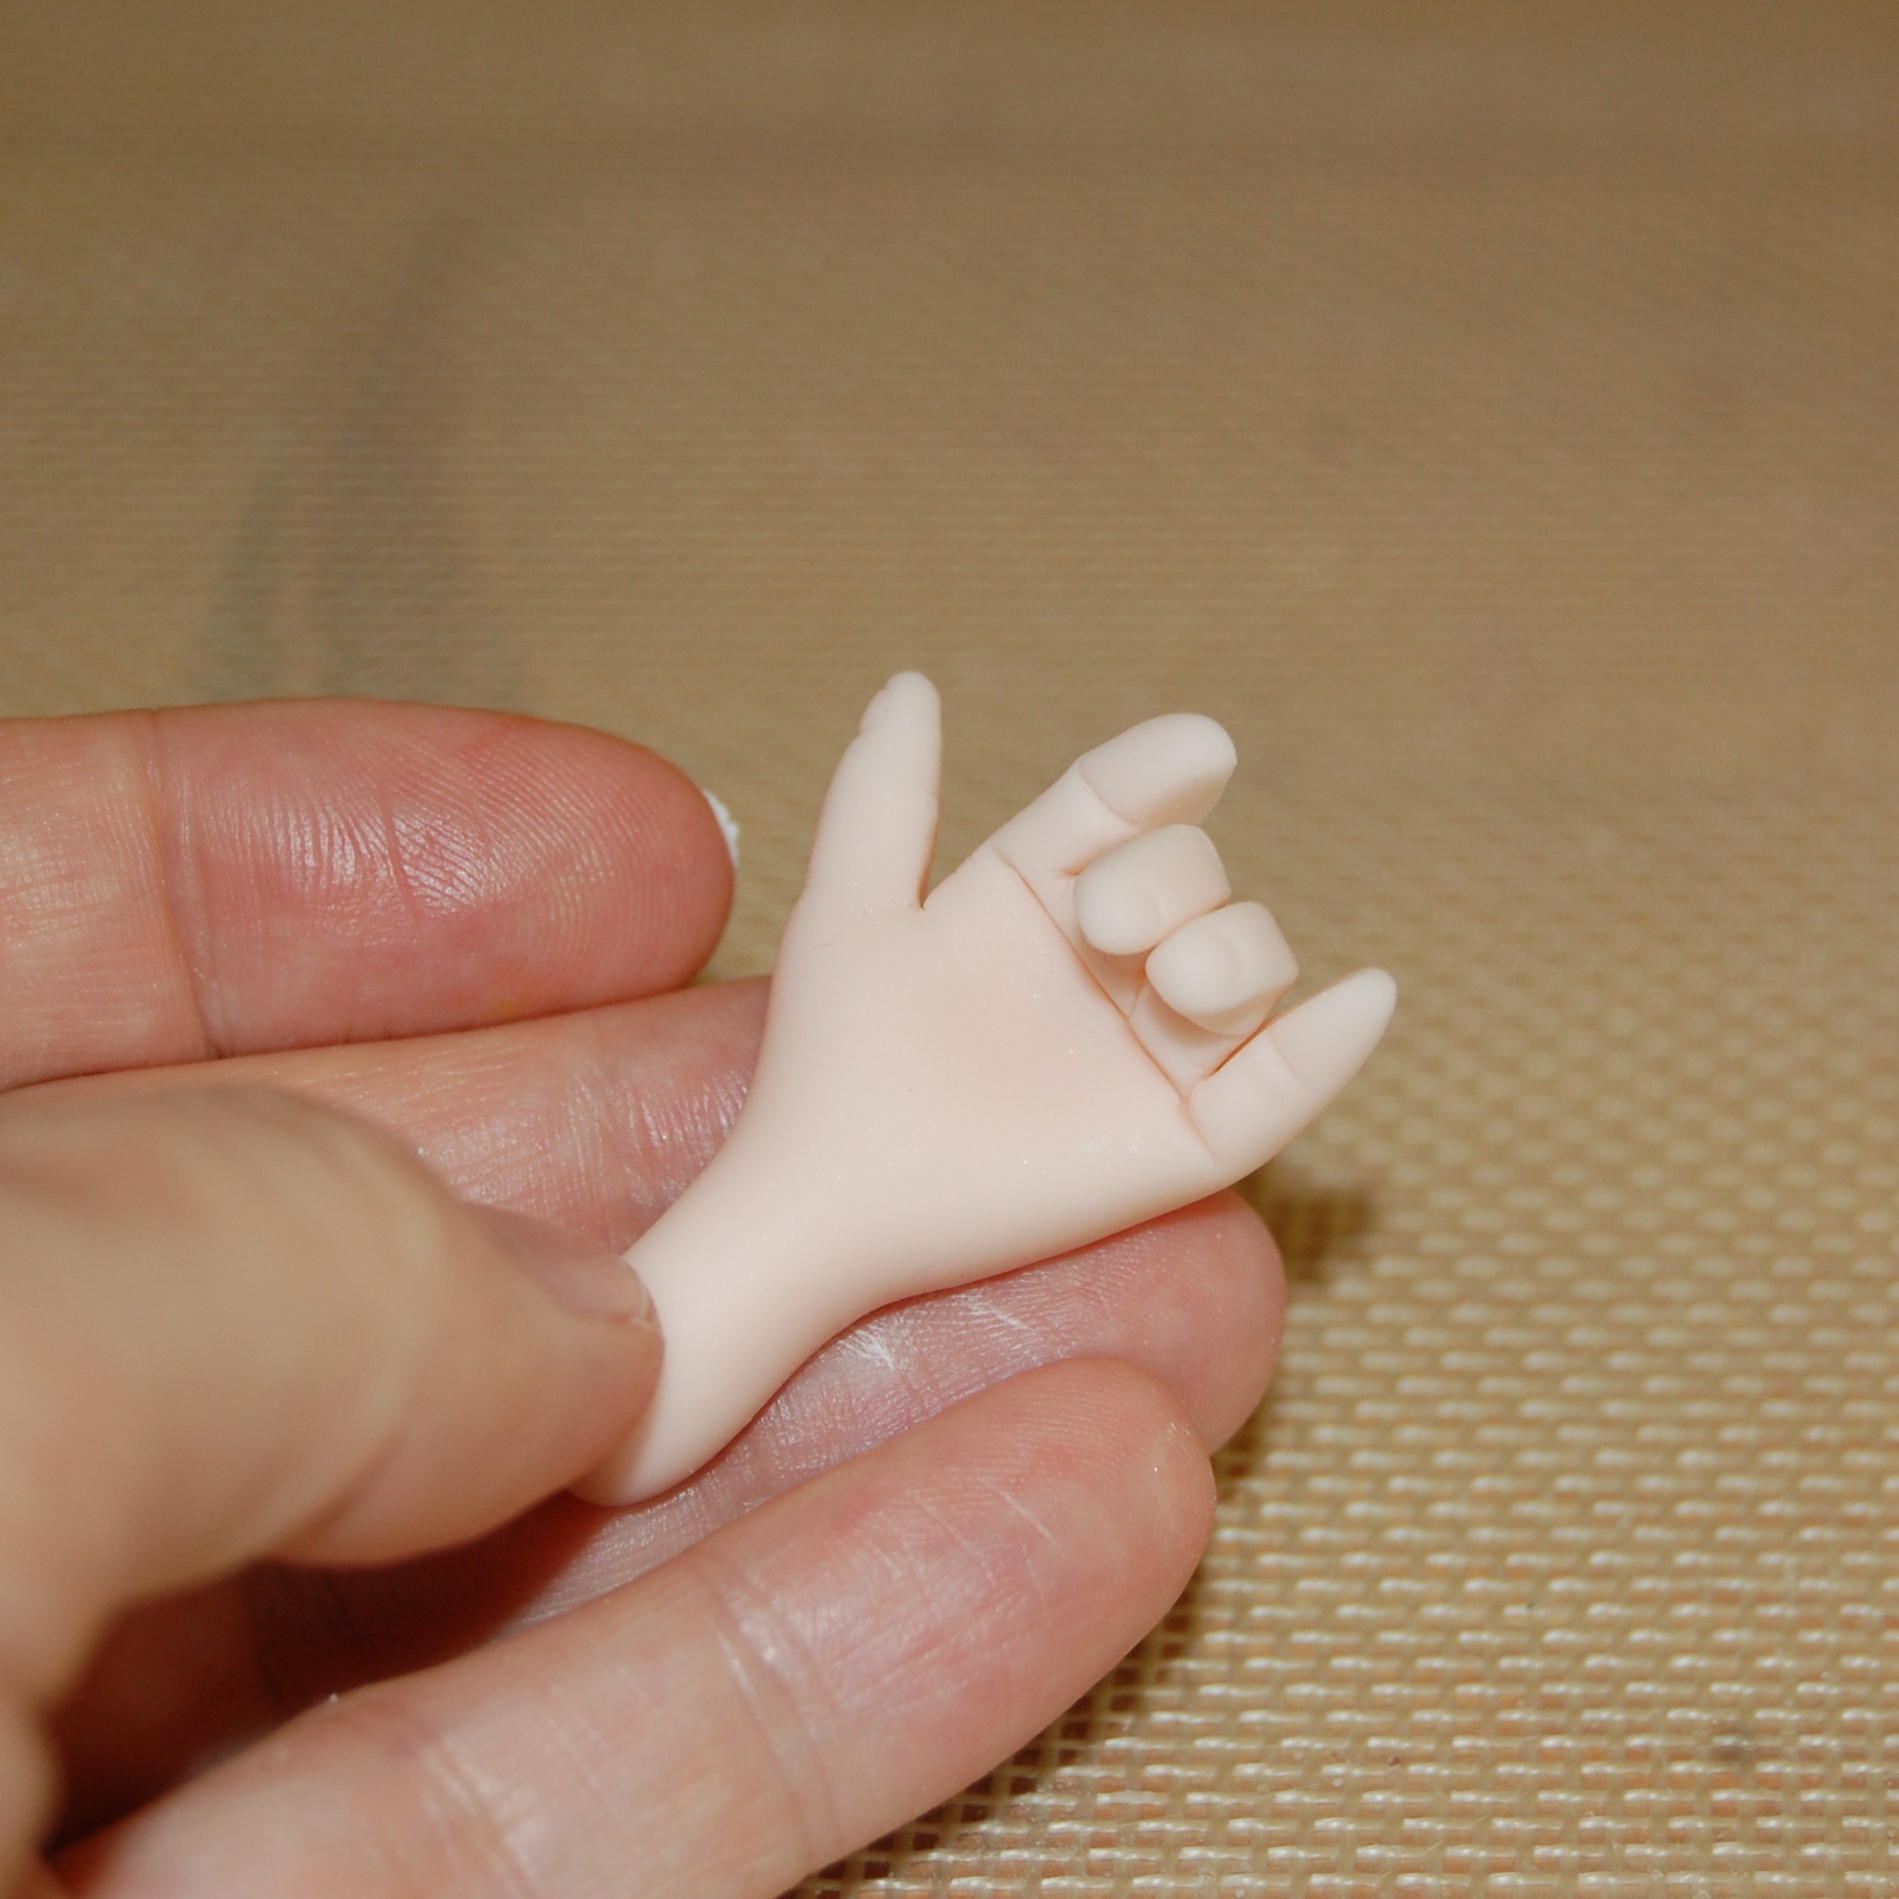 Decorator's Fingers Holding Up Completed Fondant Hand 